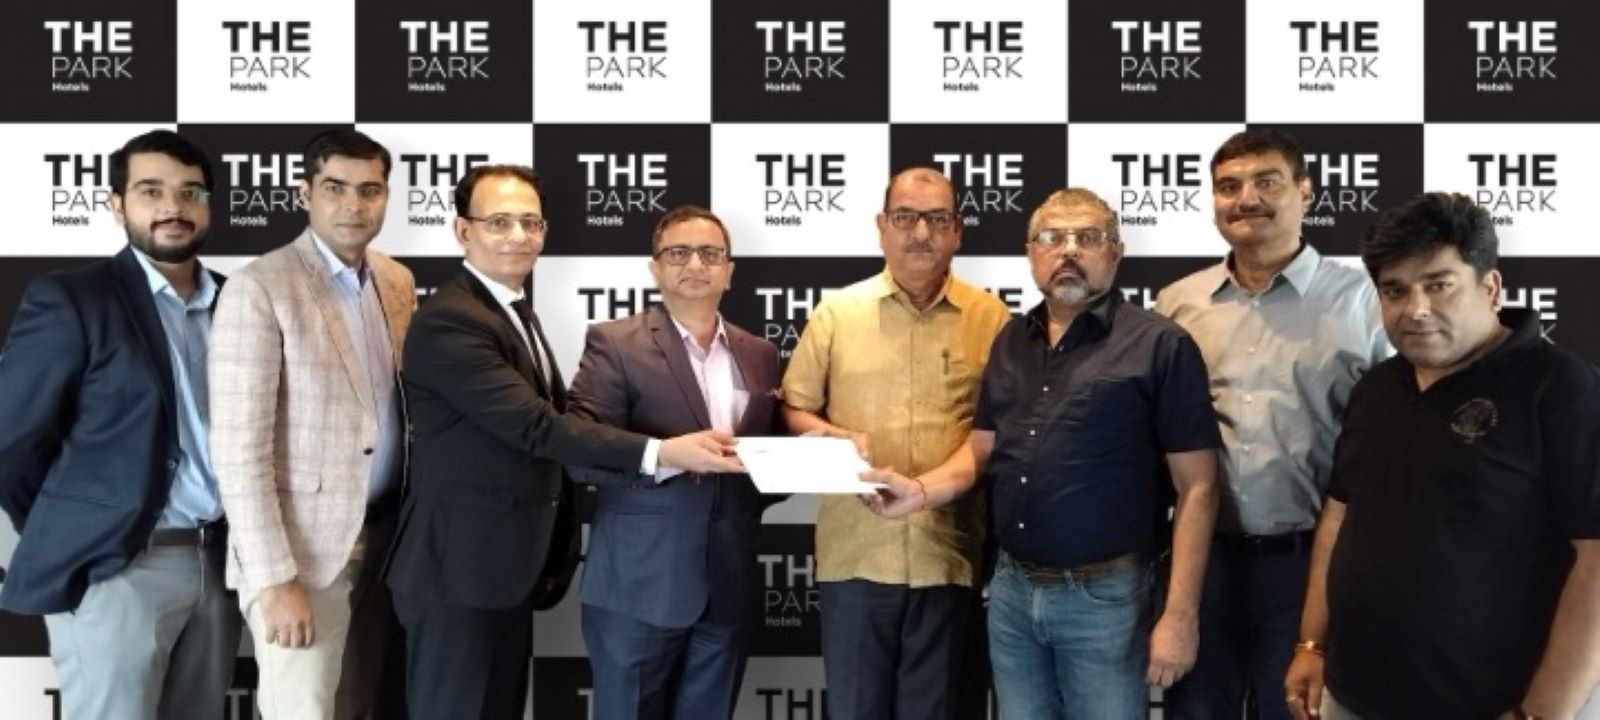 APEEJAY SURRENDRA PARK HOTELS ANNOUNCES SIGNING OF  ITS FIRST HOTEL UNDERTHE PARK BRAND IN NAINITAL, UTTARAKHAND